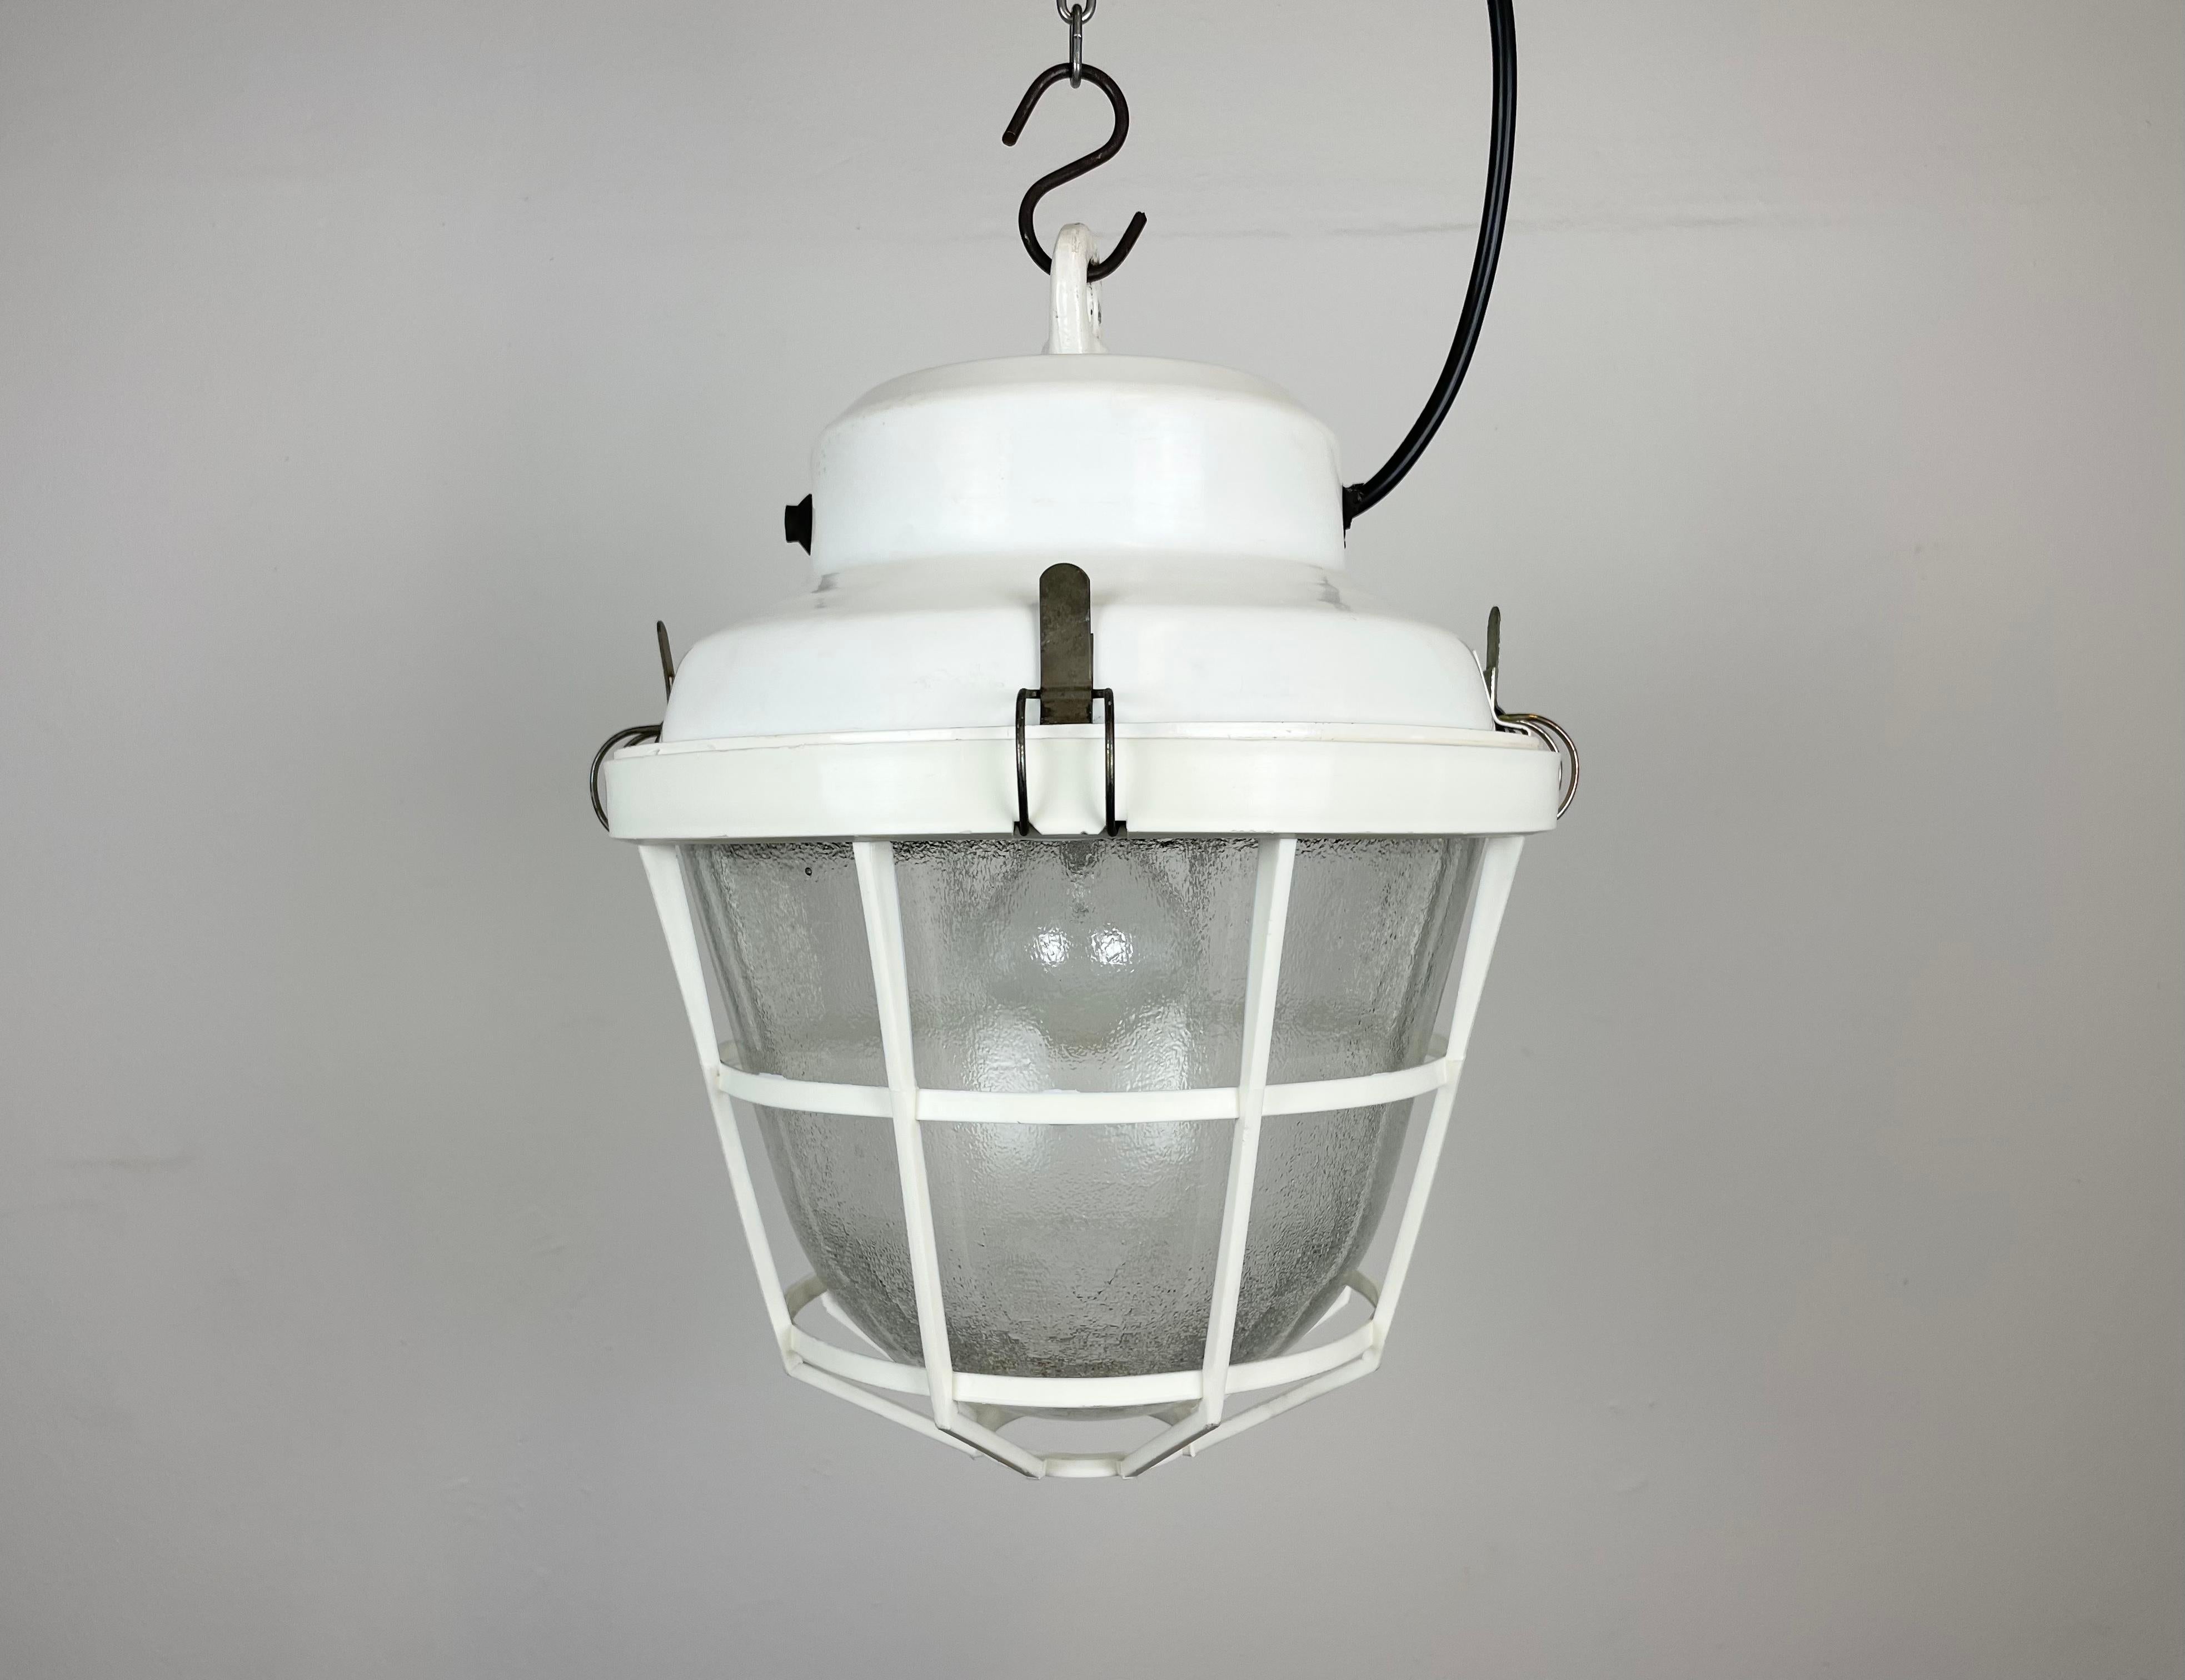 Industrial light made by Elektrosvit in former Czechoslovakia during the 1980s. It features a white iron top, a frosted glass and a white plastic protective grid.
The porcelain socket requires standard E27/ E26 lightbulbs. New wire. The weight of